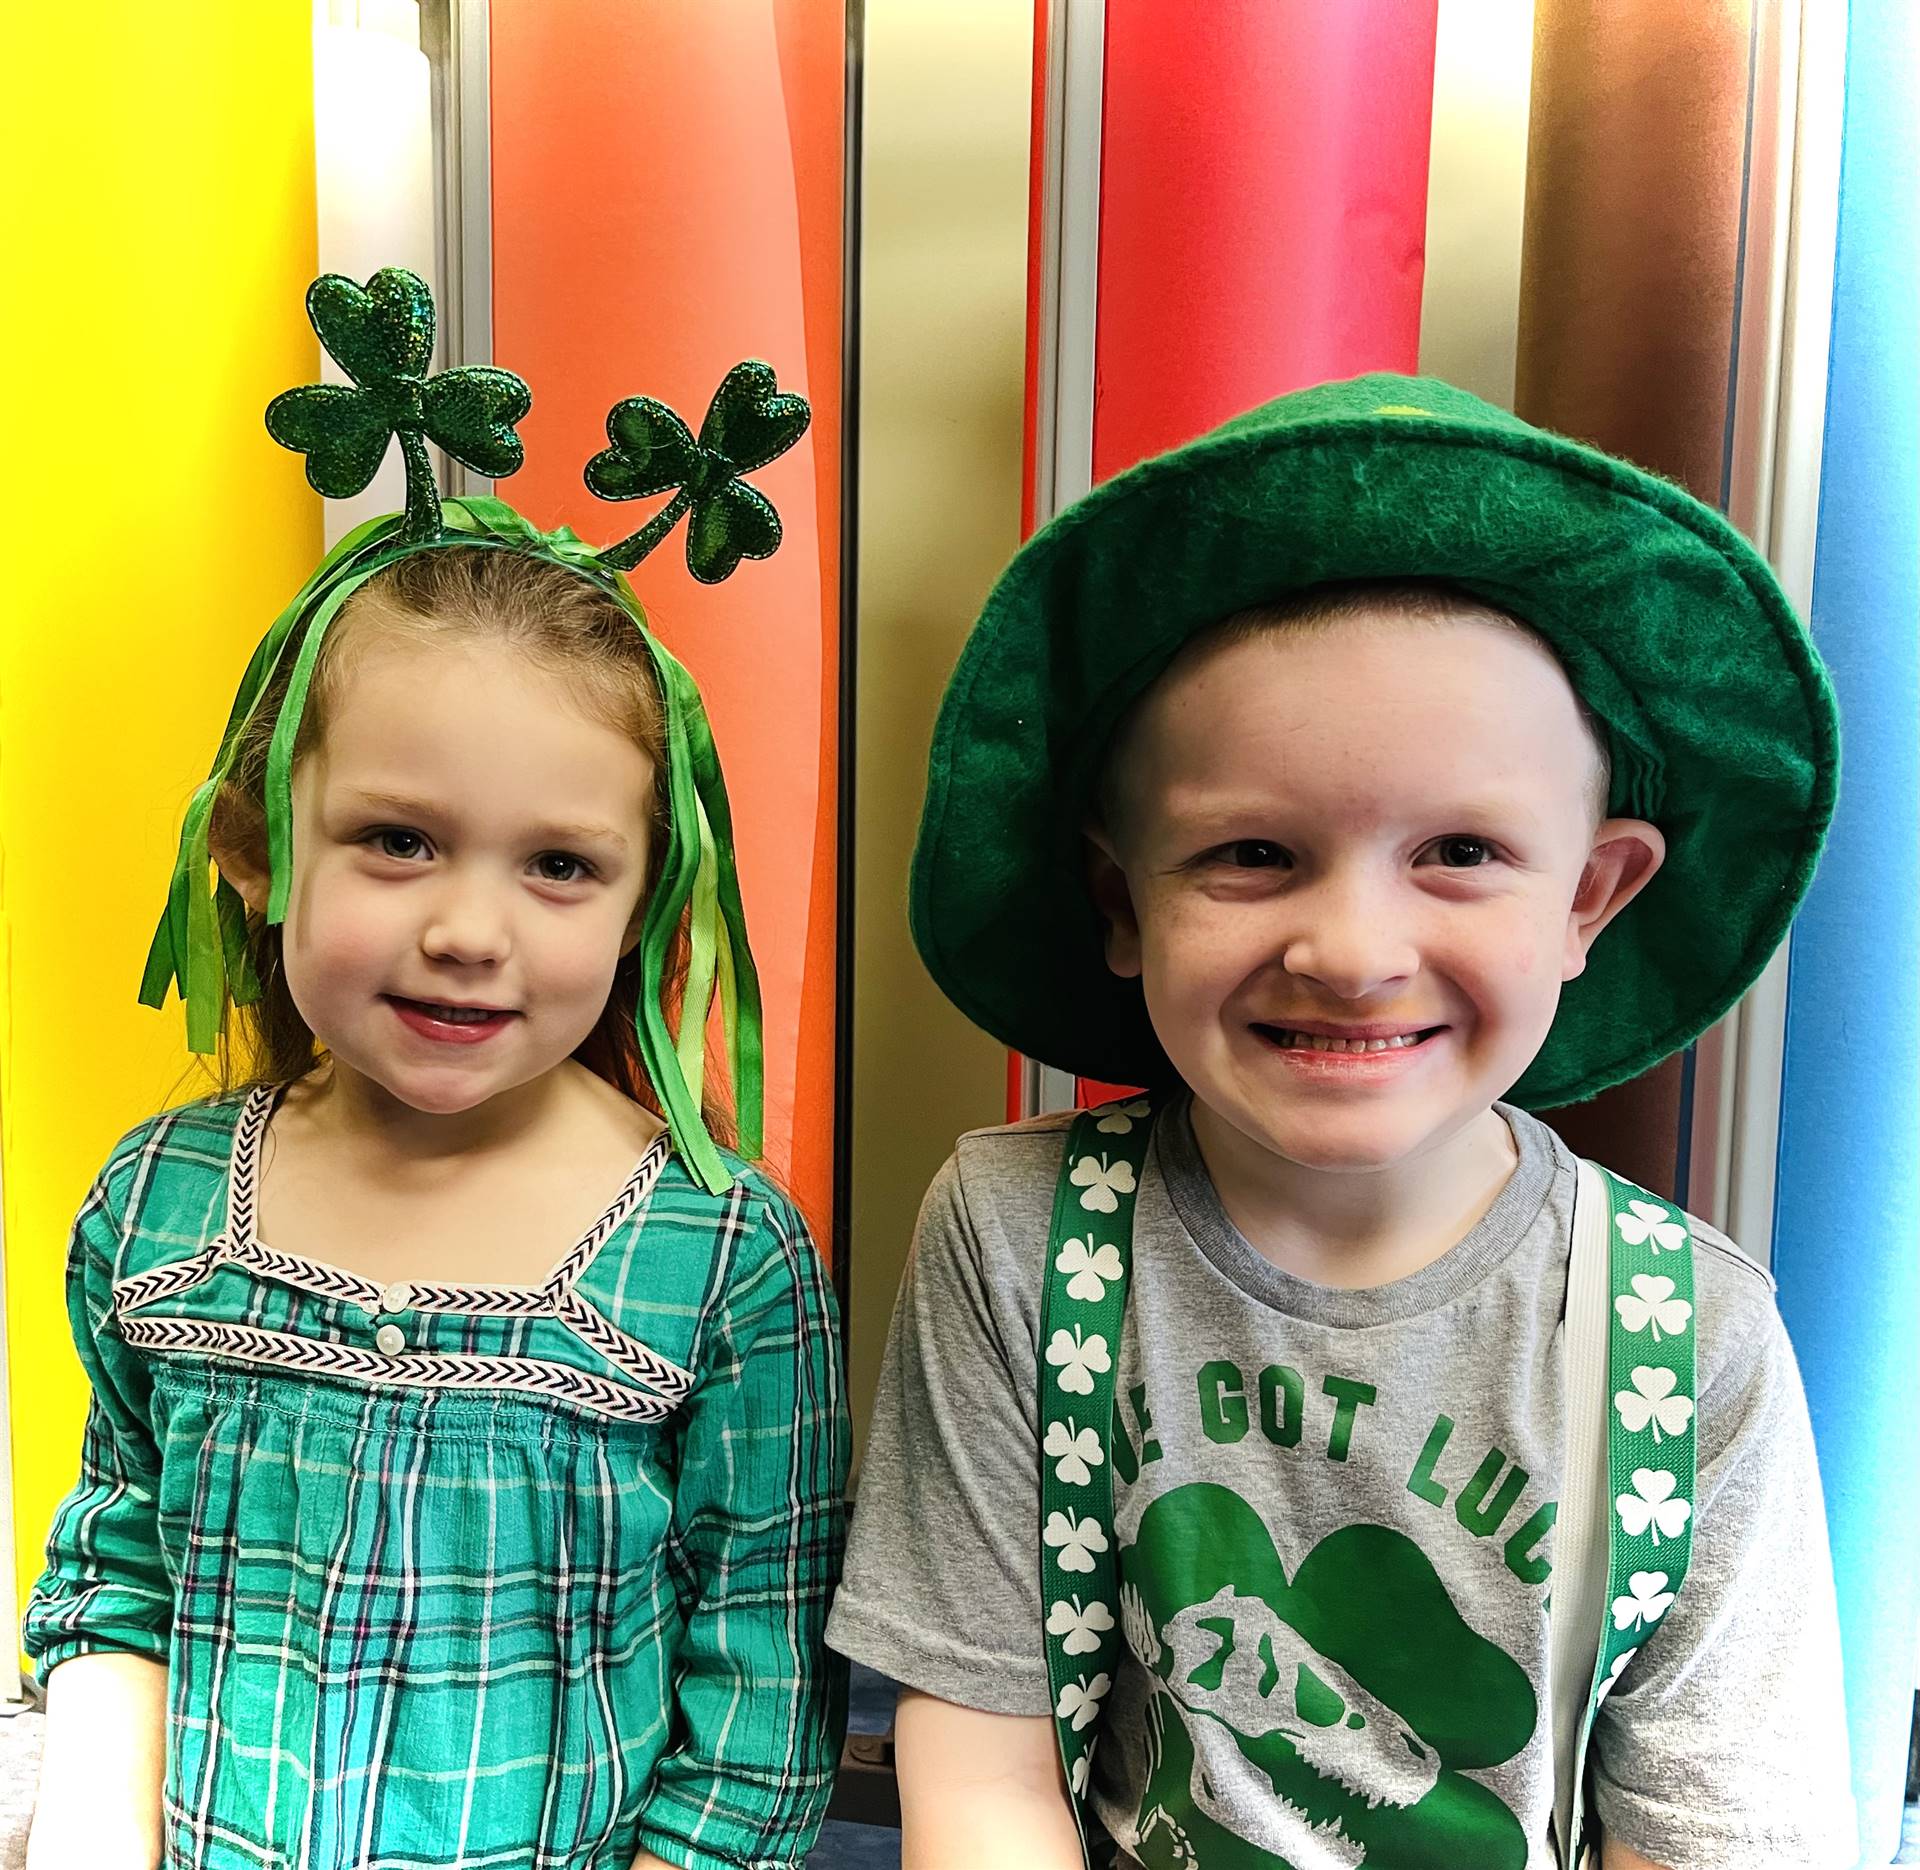 a student with a green felt hat and 1 student with a green shamrock head band against a rainbow back